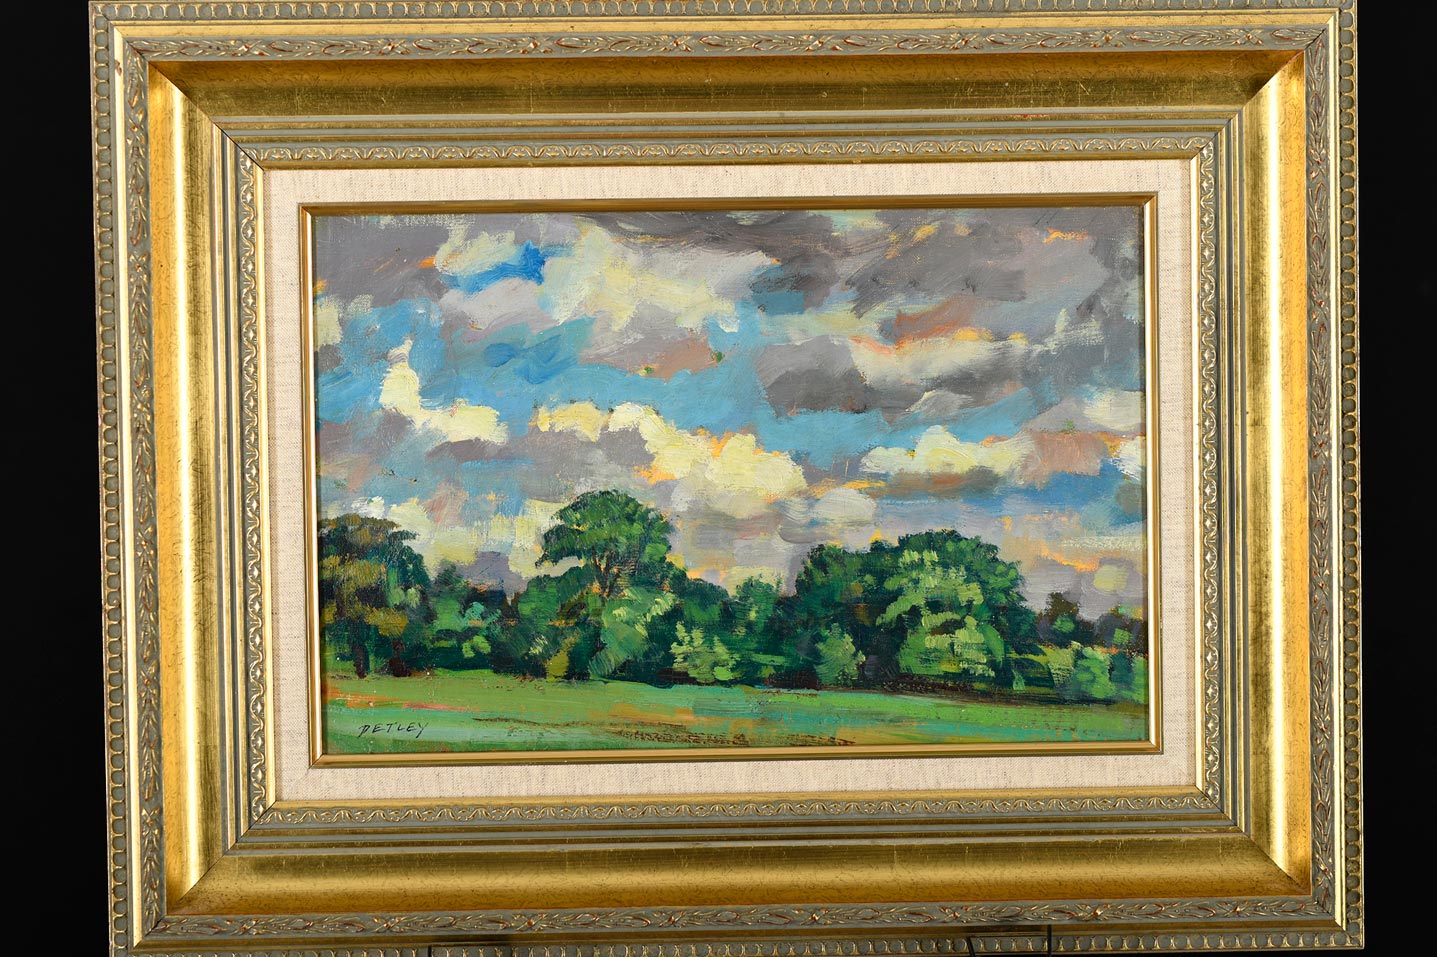 Original Framed Oil on Canvas by Petley - Image 4 of 4